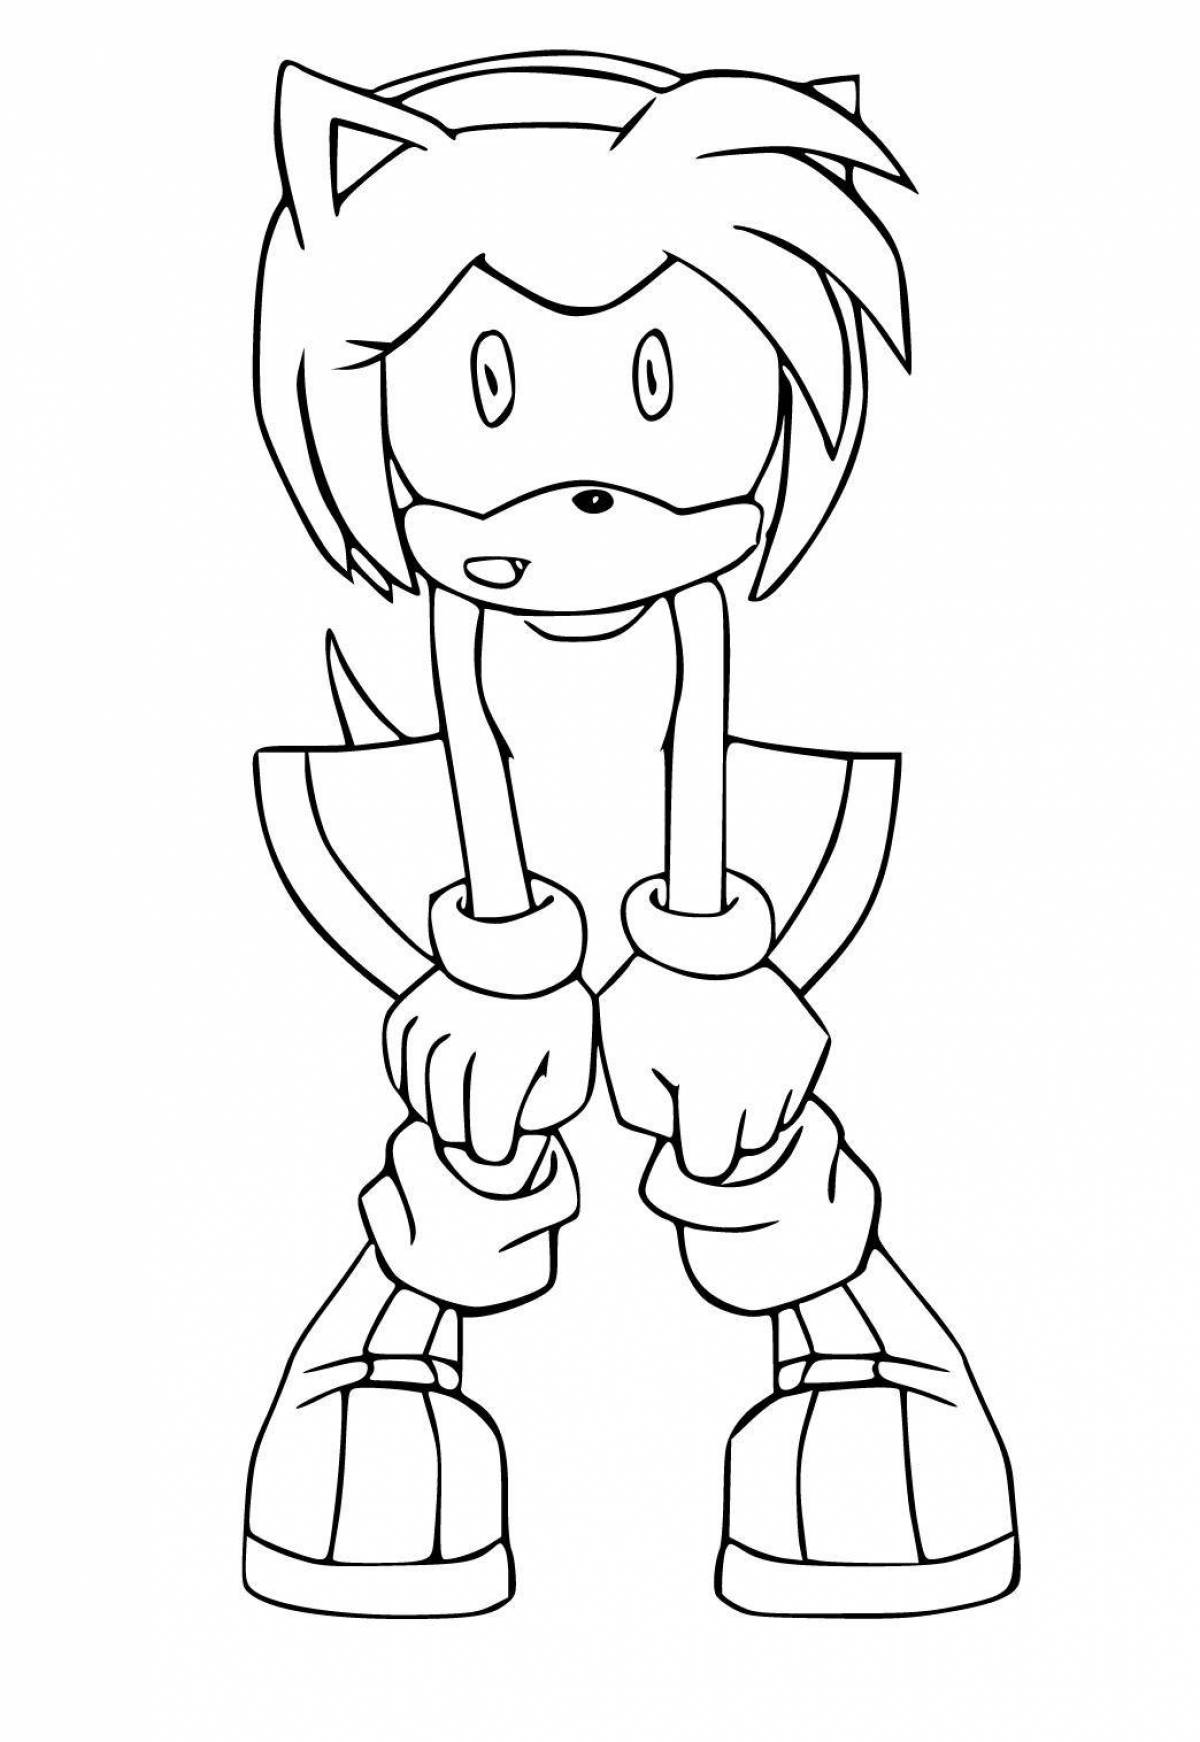 Flashing sonic and amy rose coloring book